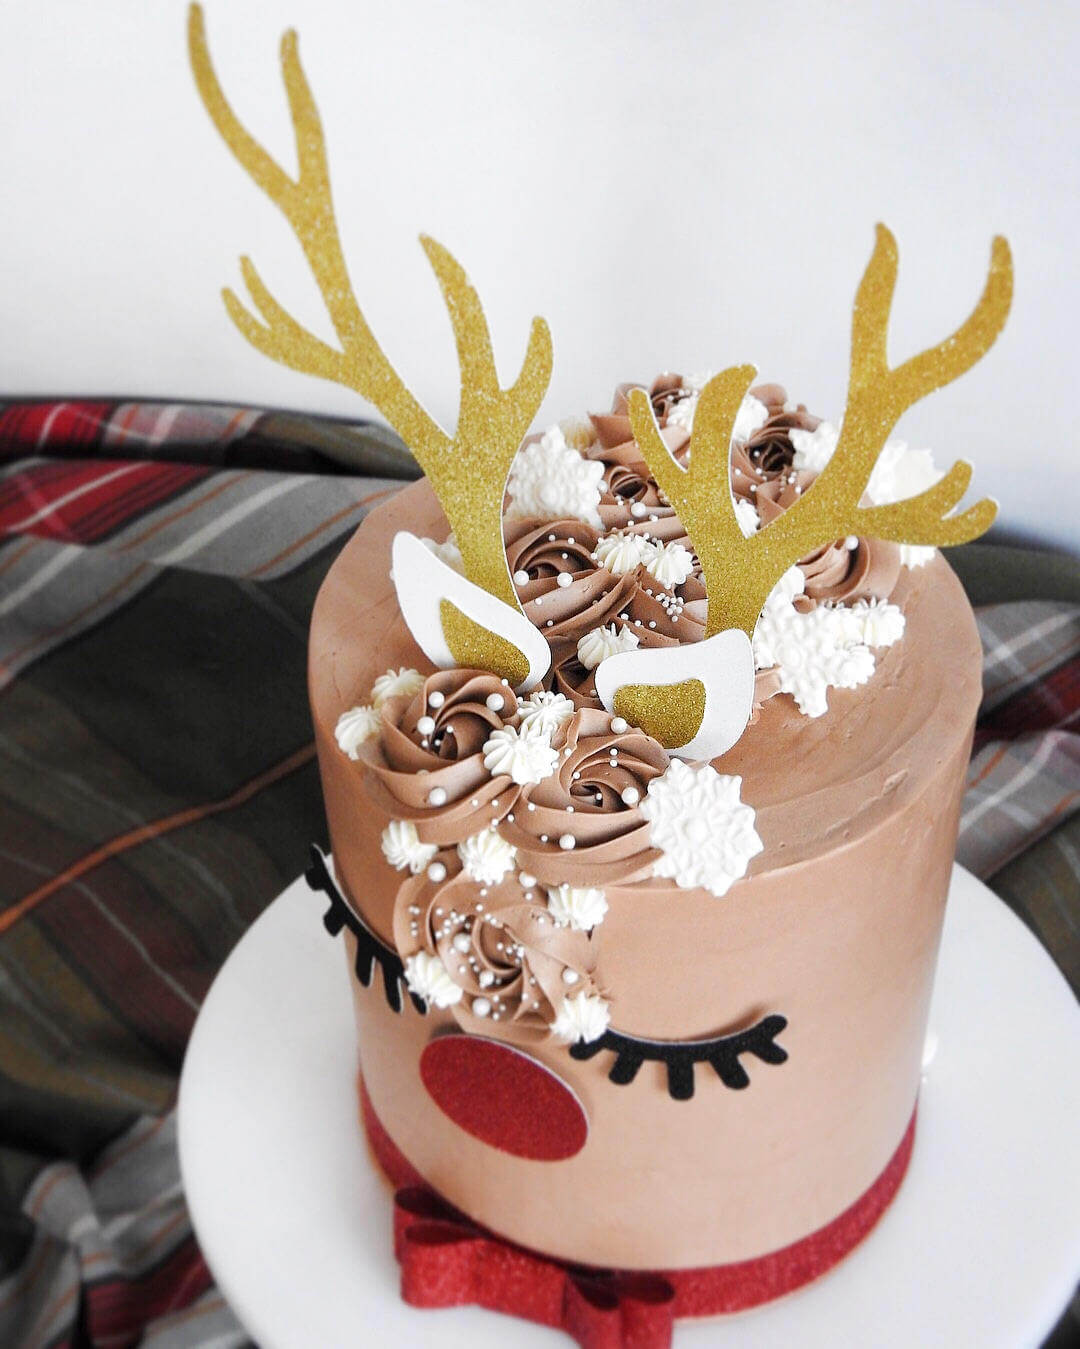 Adorable Reindeer Cake Topper for Holiday Parties — Homebnc